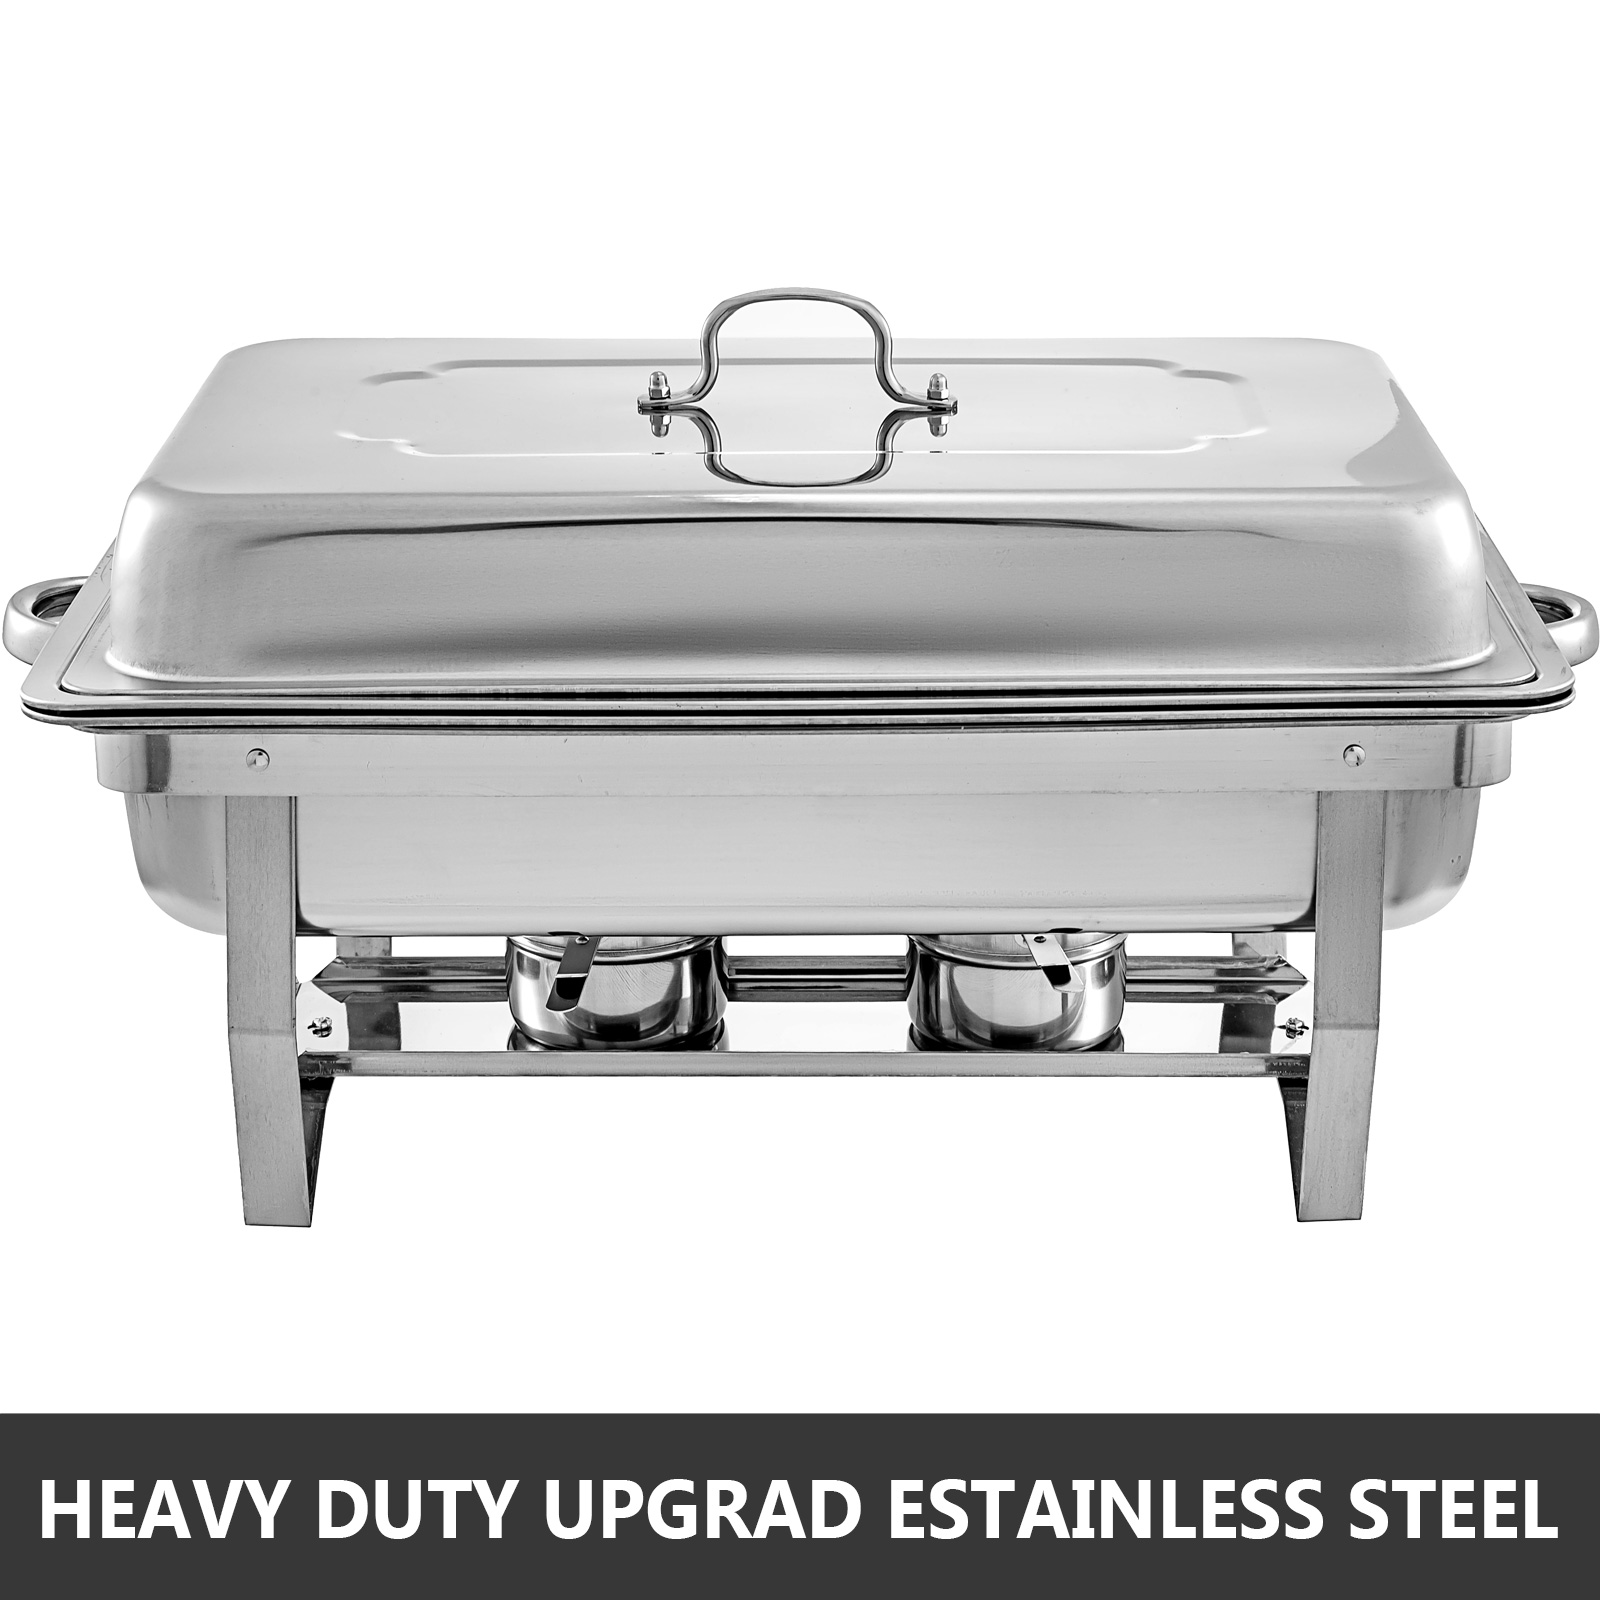 CATERING STAINLESS STEEL 4 PACK CHAFER CHAFING DISH SETS 8 QT FULL SIZE BUFFET 